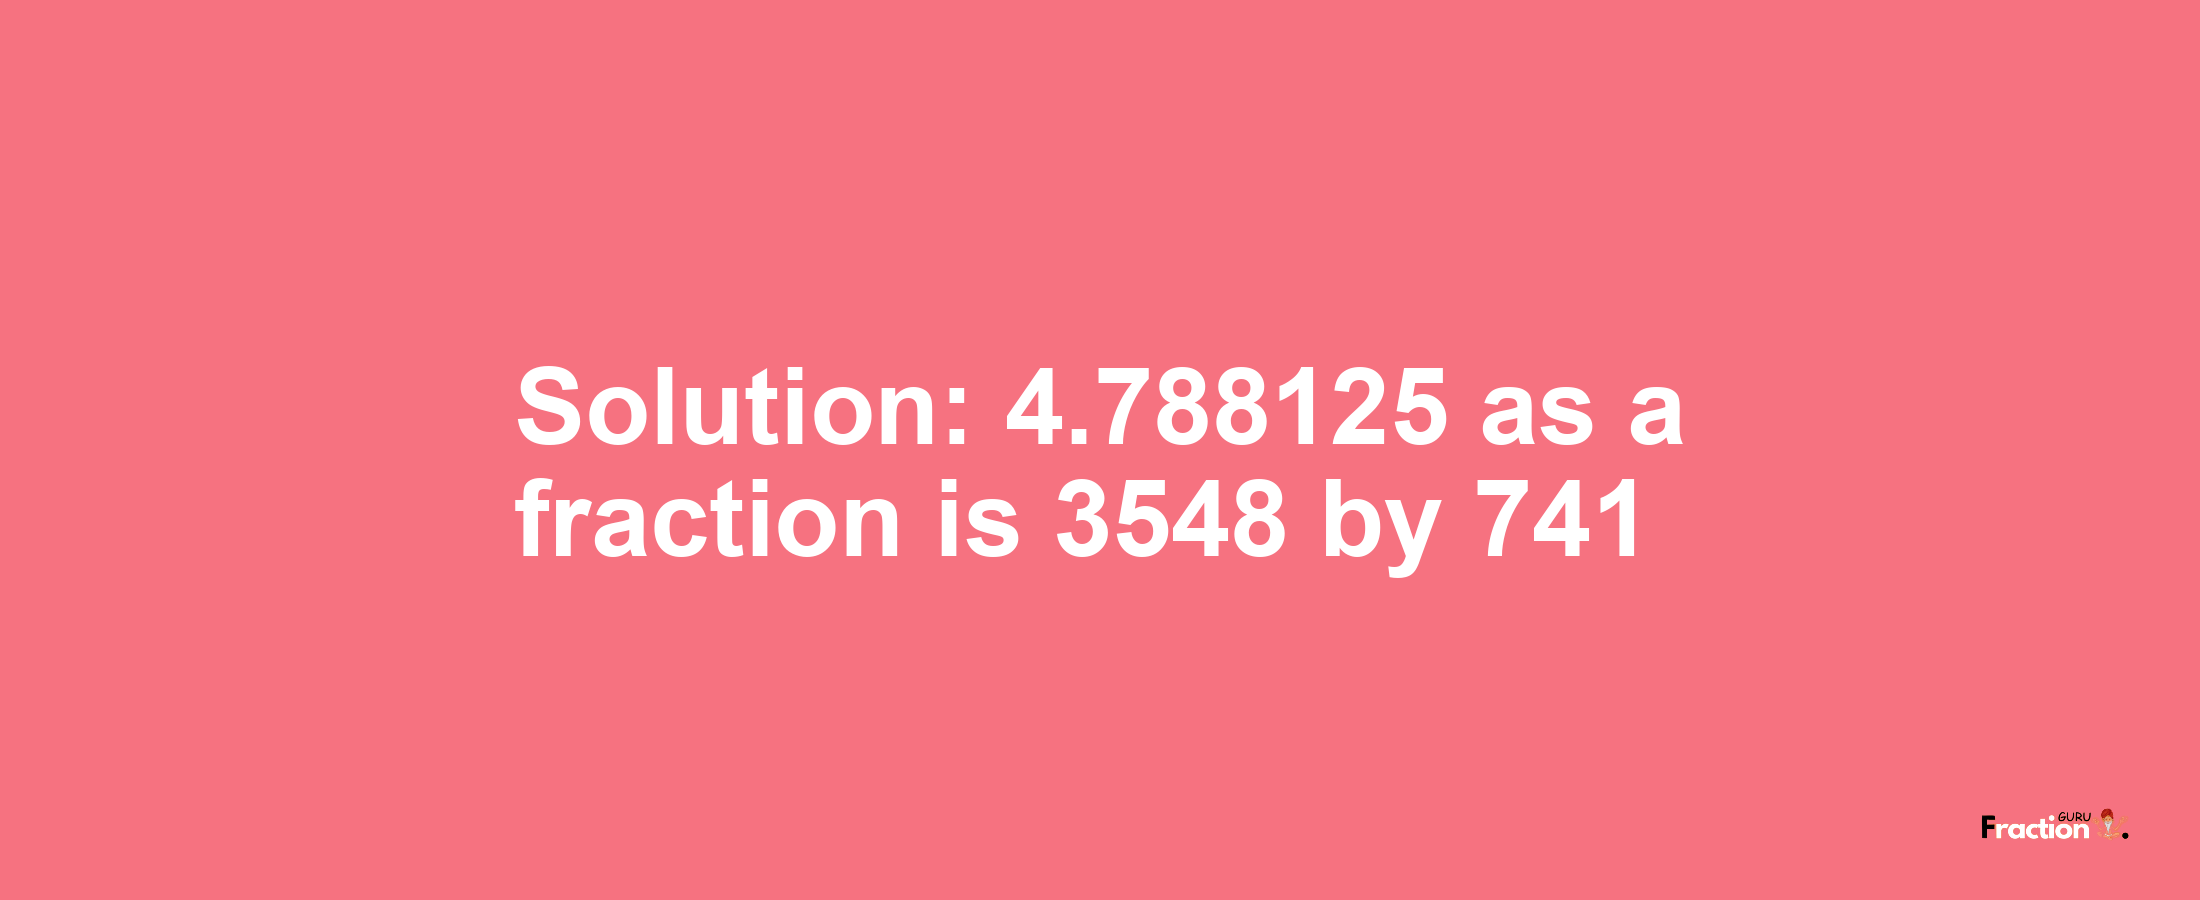 Solution:4.788125 as a fraction is 3548/741